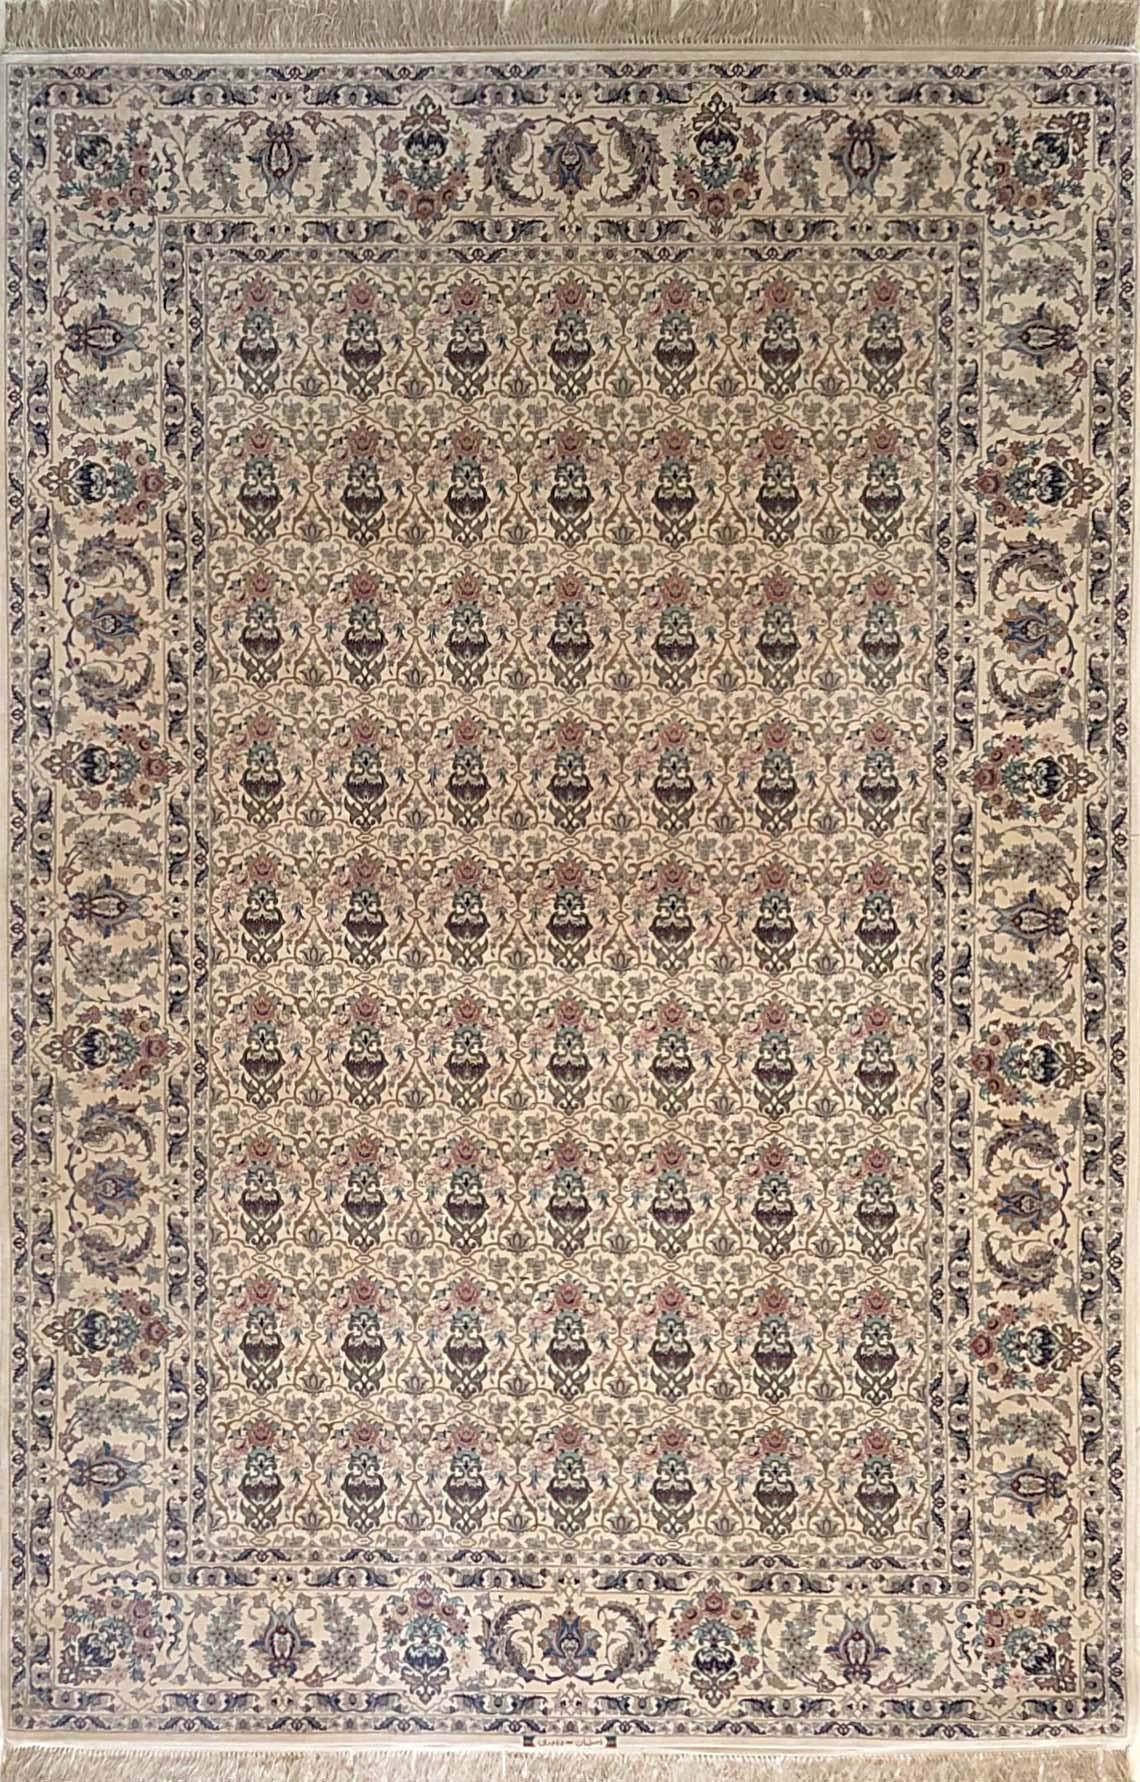 This authentic Persian Isfahan rug has wool and silk pile on silk foundation and has an excellent condition. The color combination in this rug is absolutely outstanding. This Isfahan rug is excellent for decorative purposes, employing soft pastel